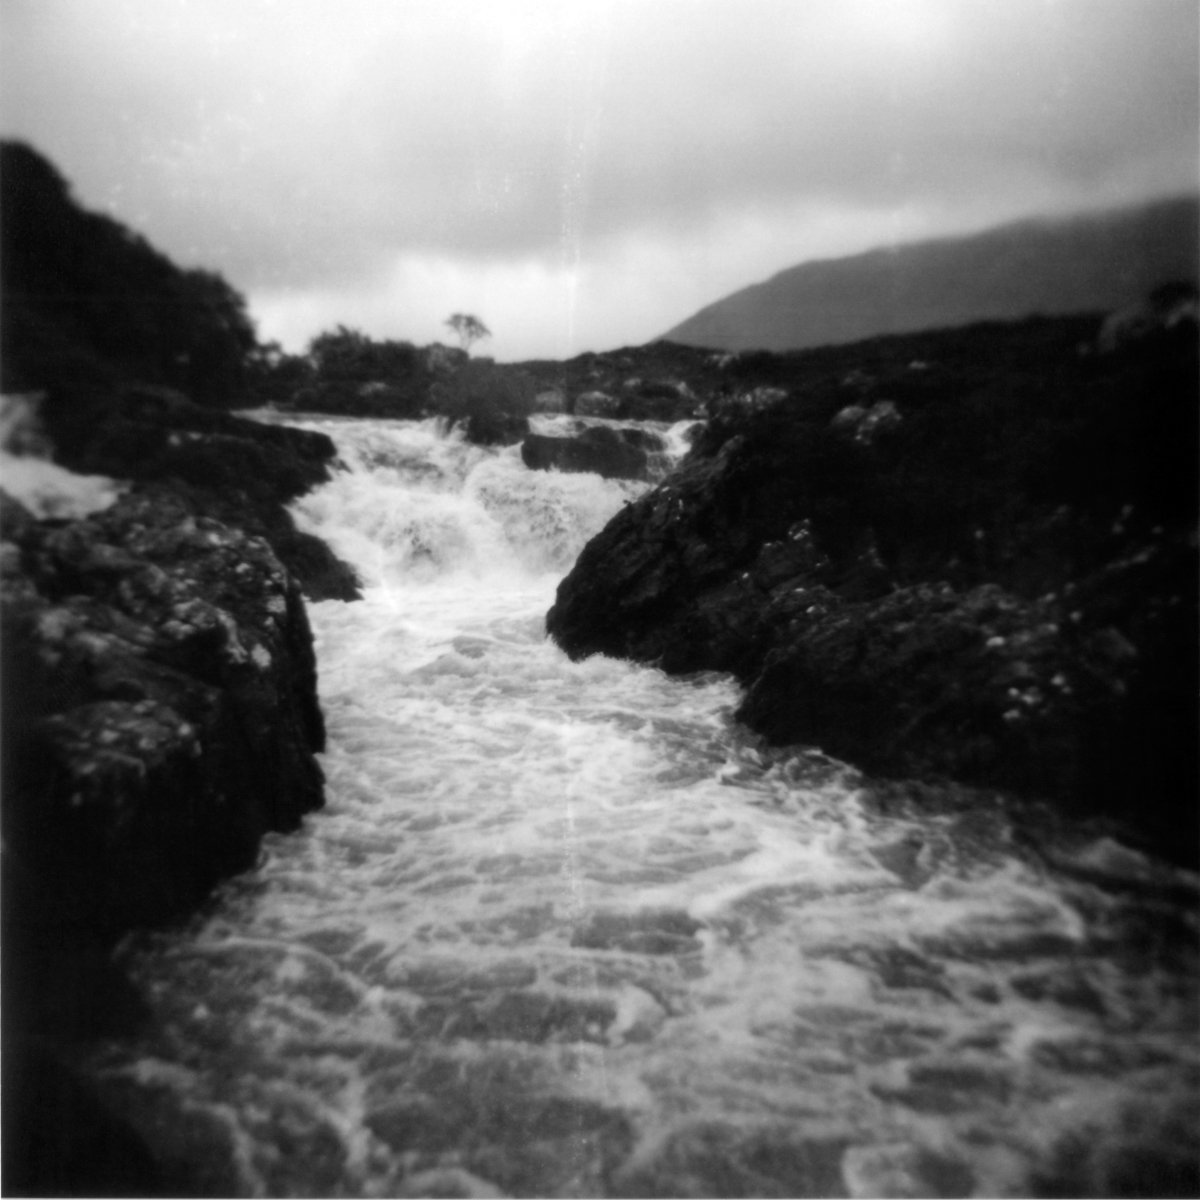 Spate 2 (Falls Of Balgy) - Unmounted (24x24in) by Justice Hyde